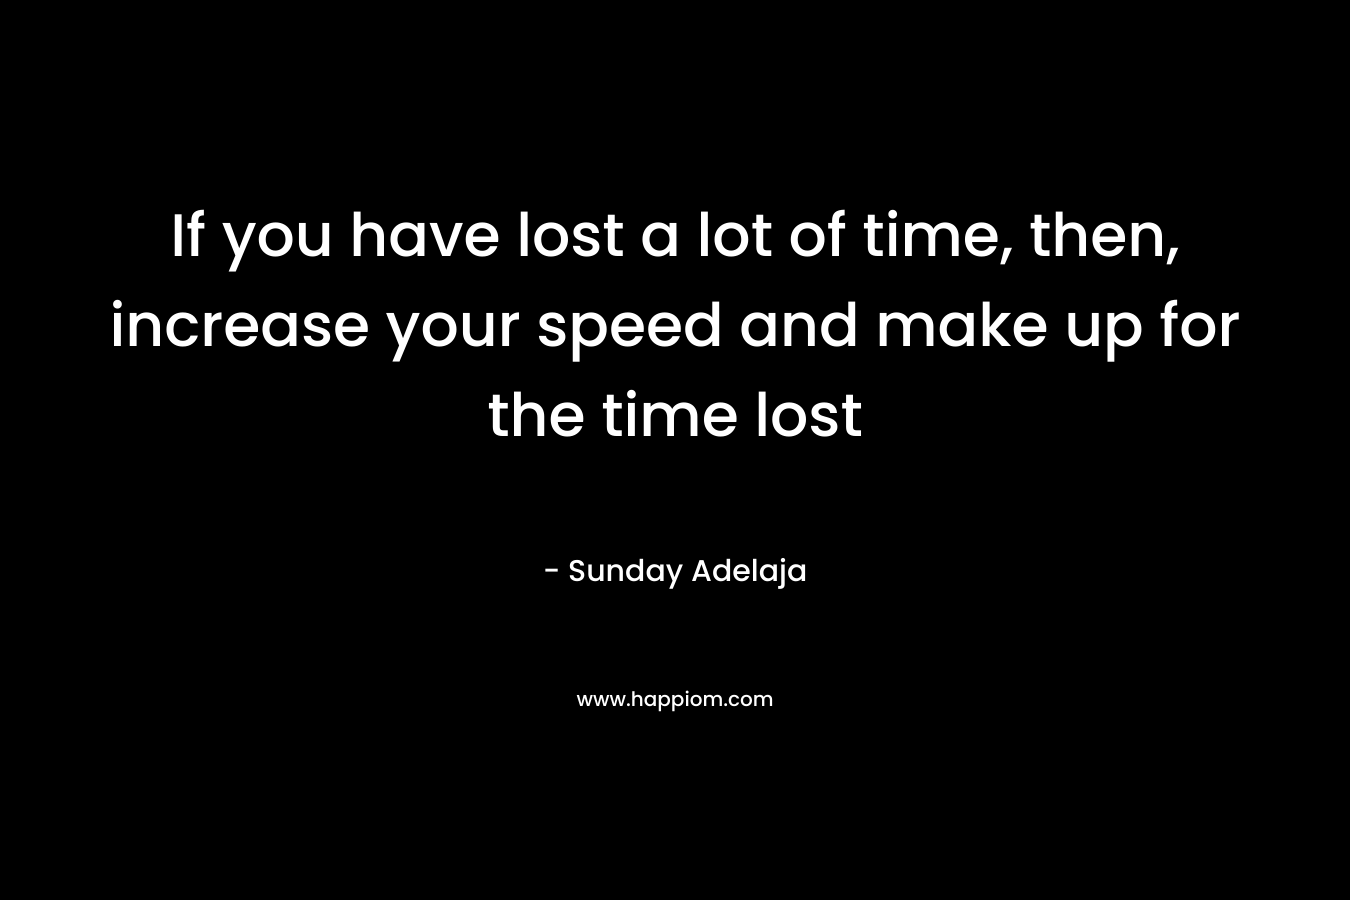 If you have lost a lot of time, then, increase your speed and make up for the time lost